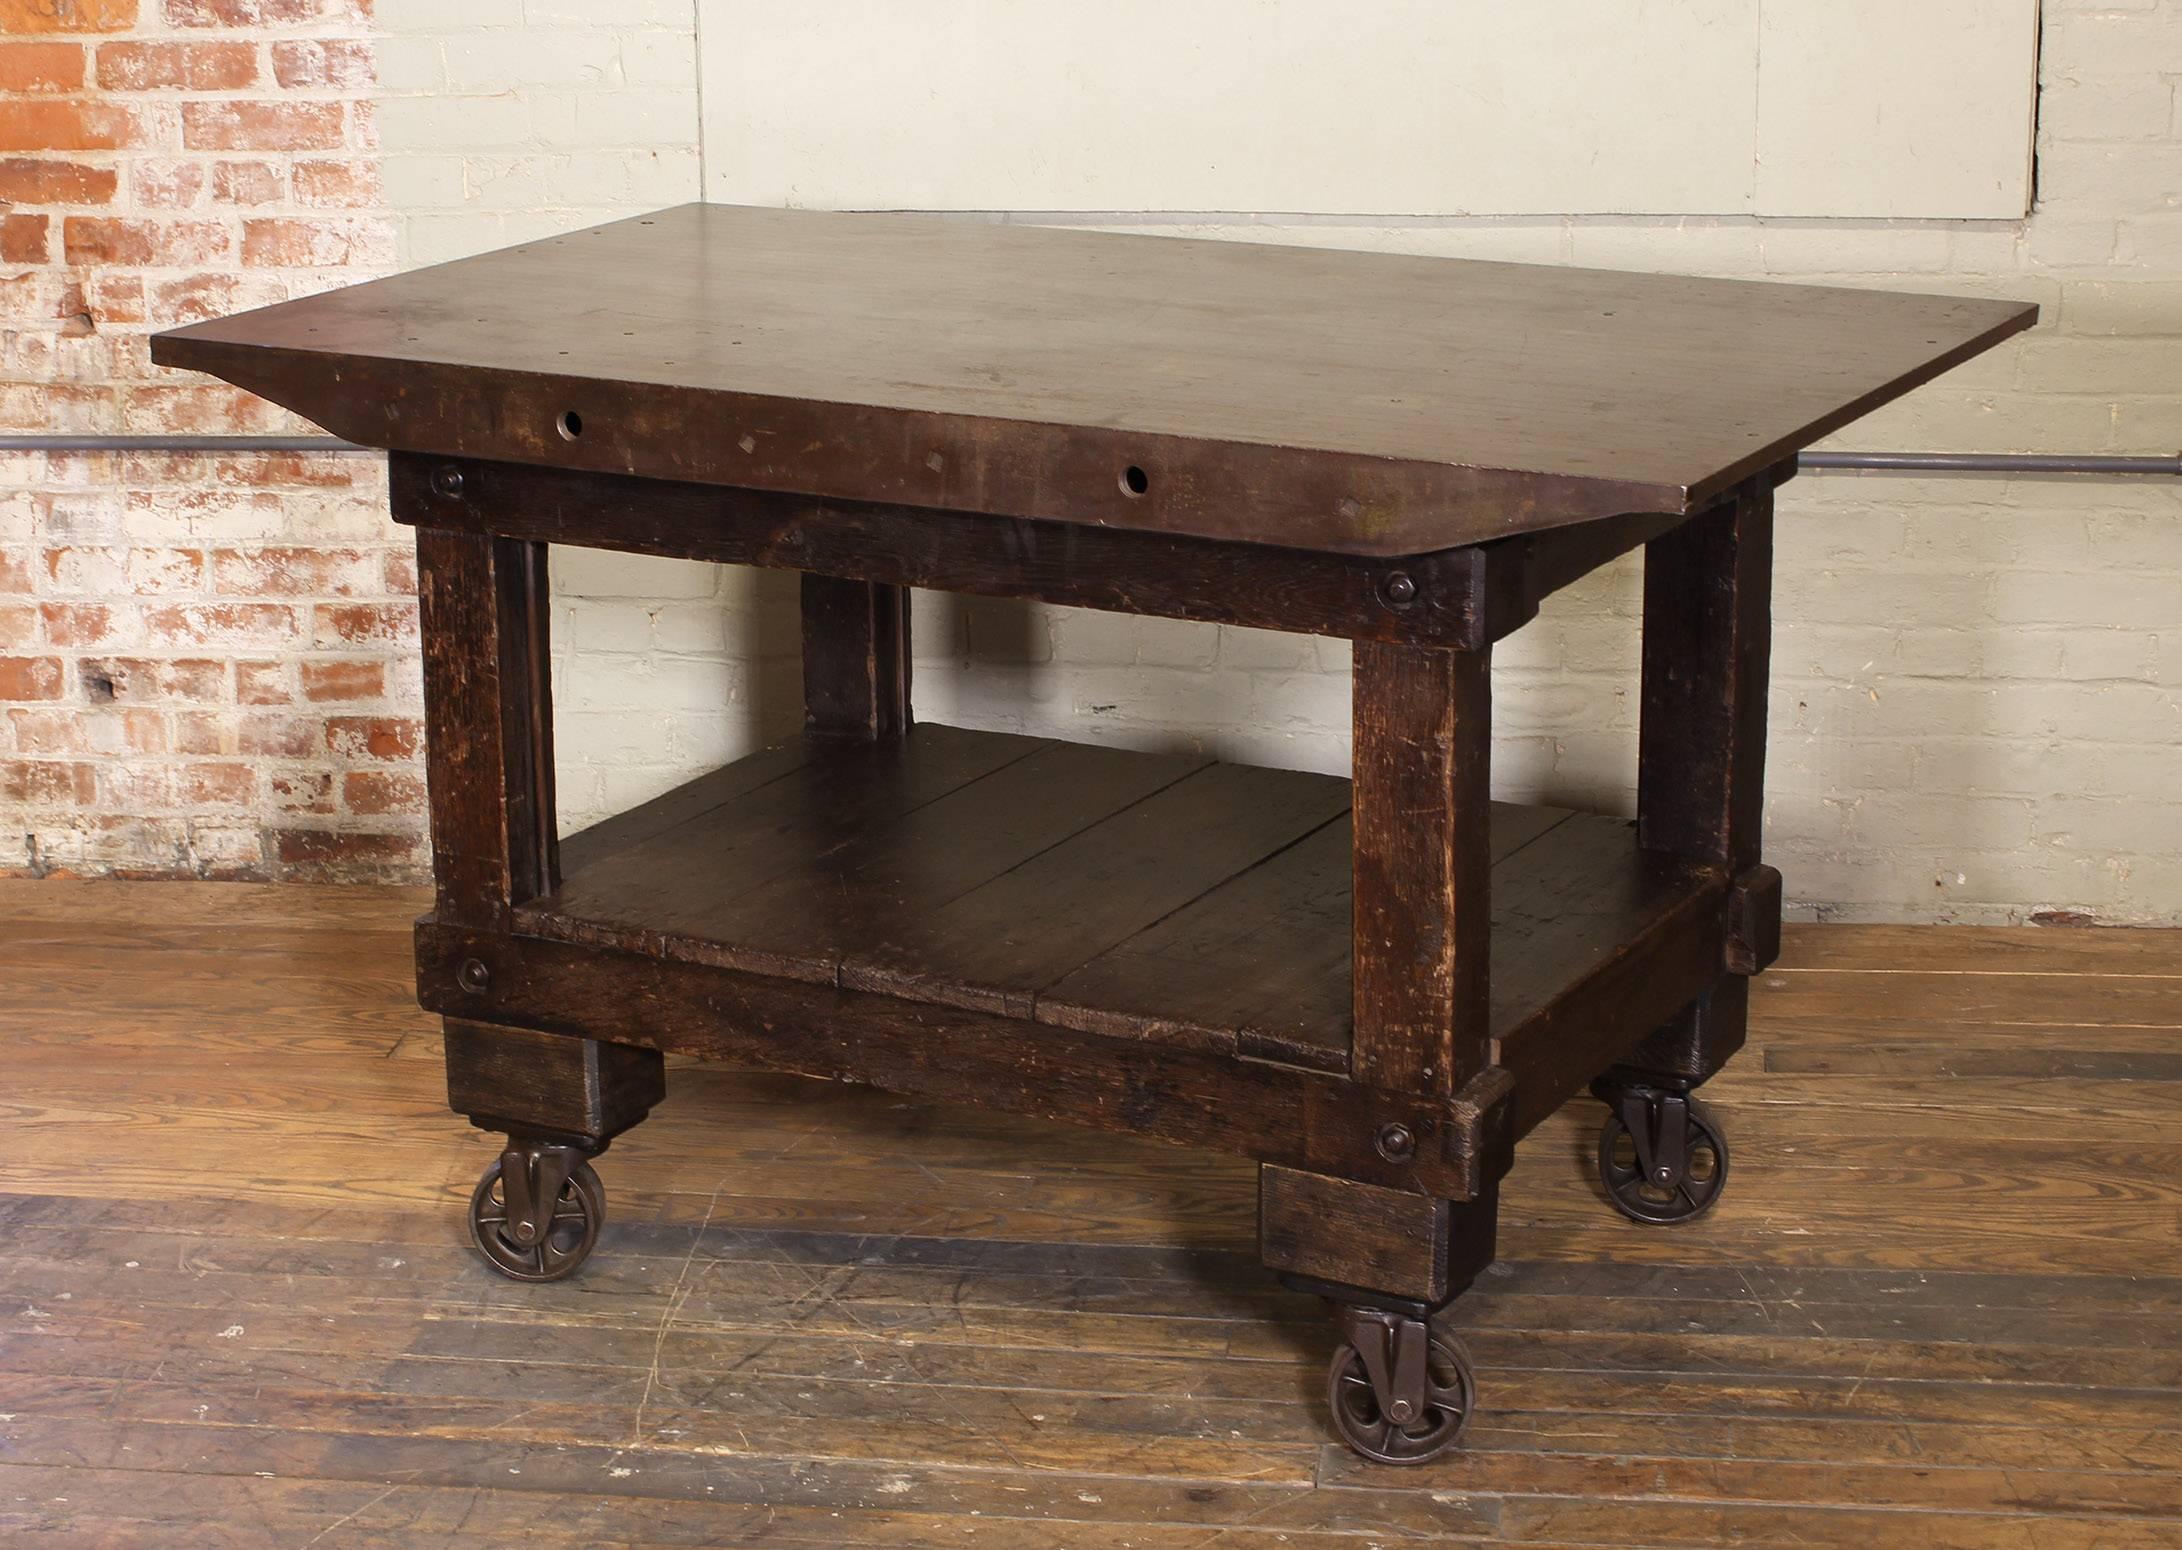 Vintage Industrial rolling kitchen island / table. Made of cast iron, steel and wood, features four swivel cast iron castors. Cast iron top measures 58 3/4